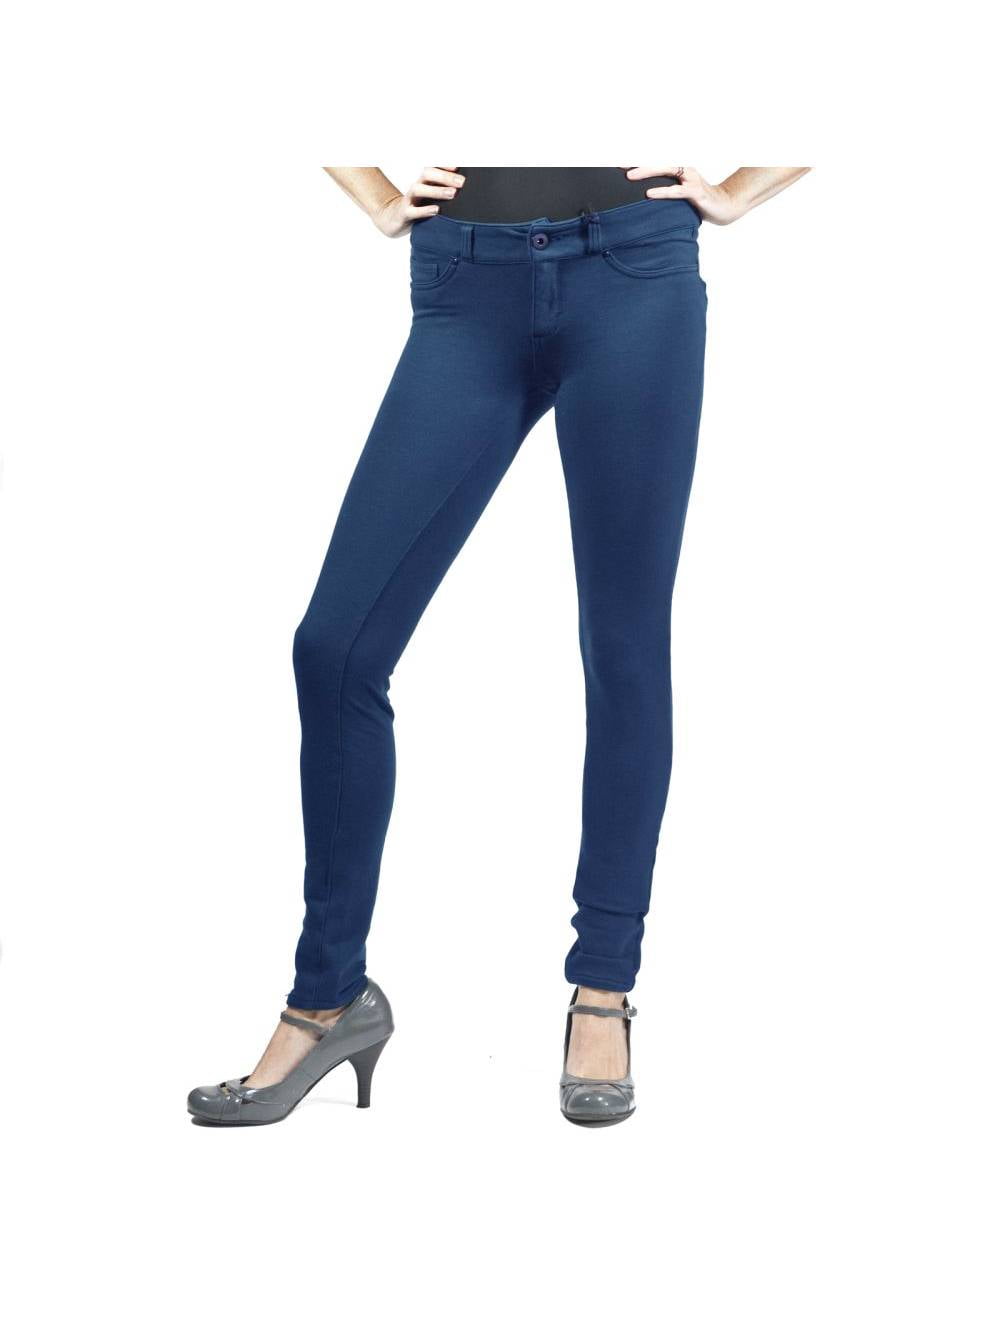 New Women/'s High Waisted Stretch Super Skinny Fit Denim Jeans Jeggings Pants